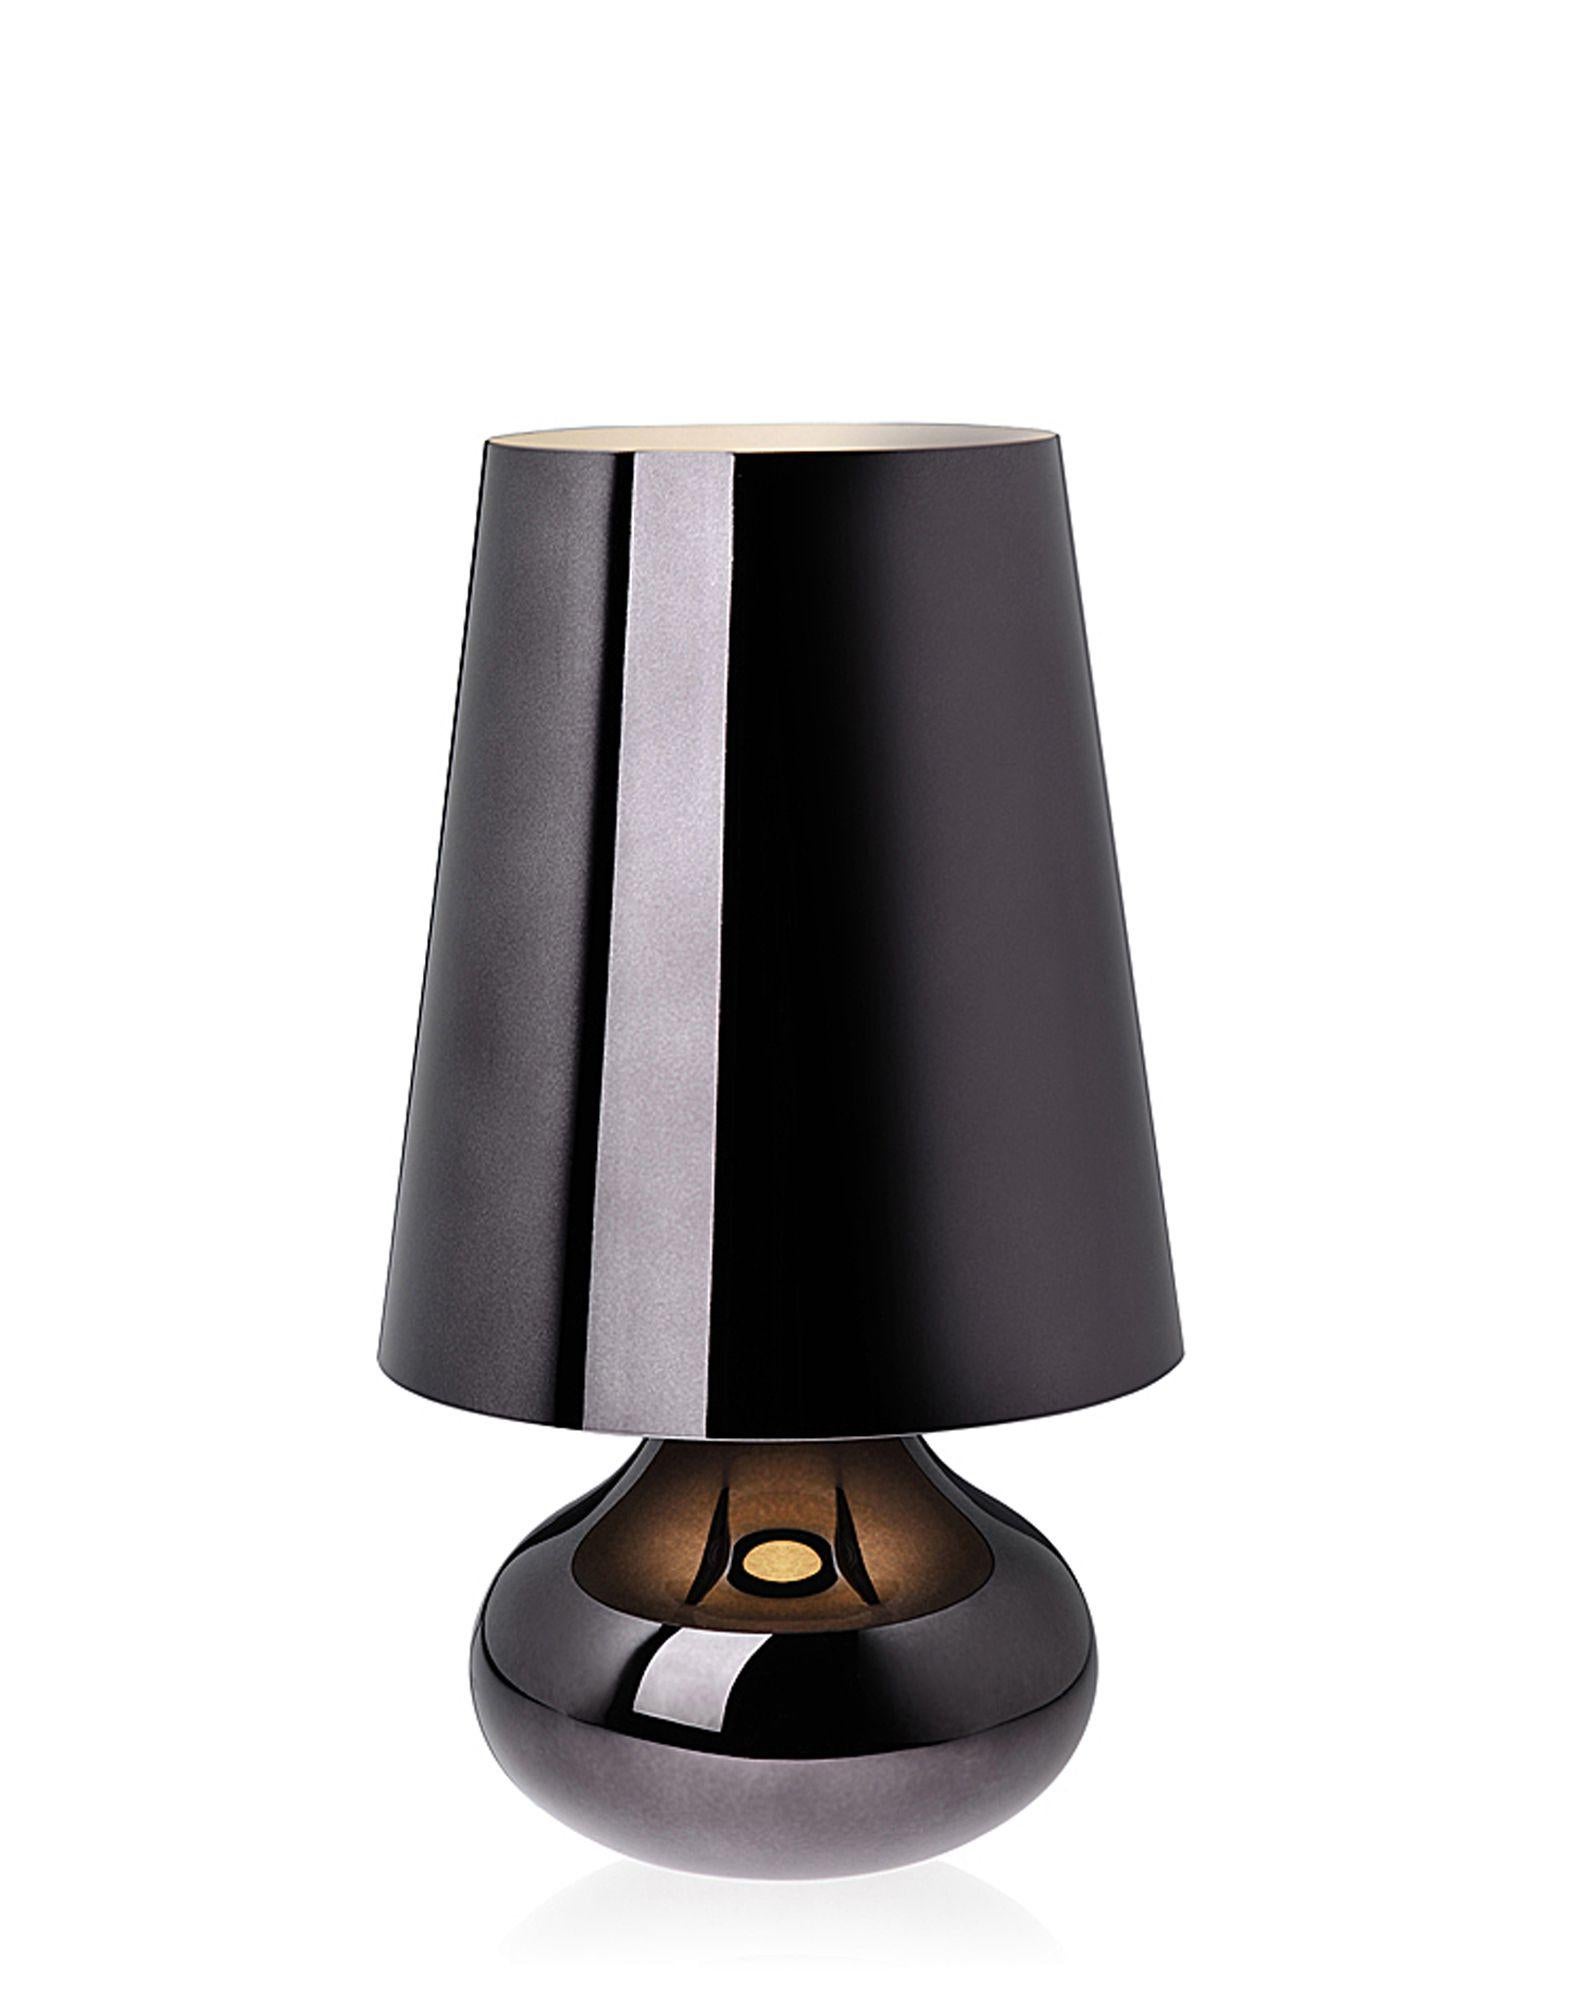 The typical table lamp of the seventies given new form and color. The Cindy lamp with a conical lampshade and rounded teardrop base comes in a broad range of all matte metallic tones. Cindy’s special feature is its shiny chrome-like finish that